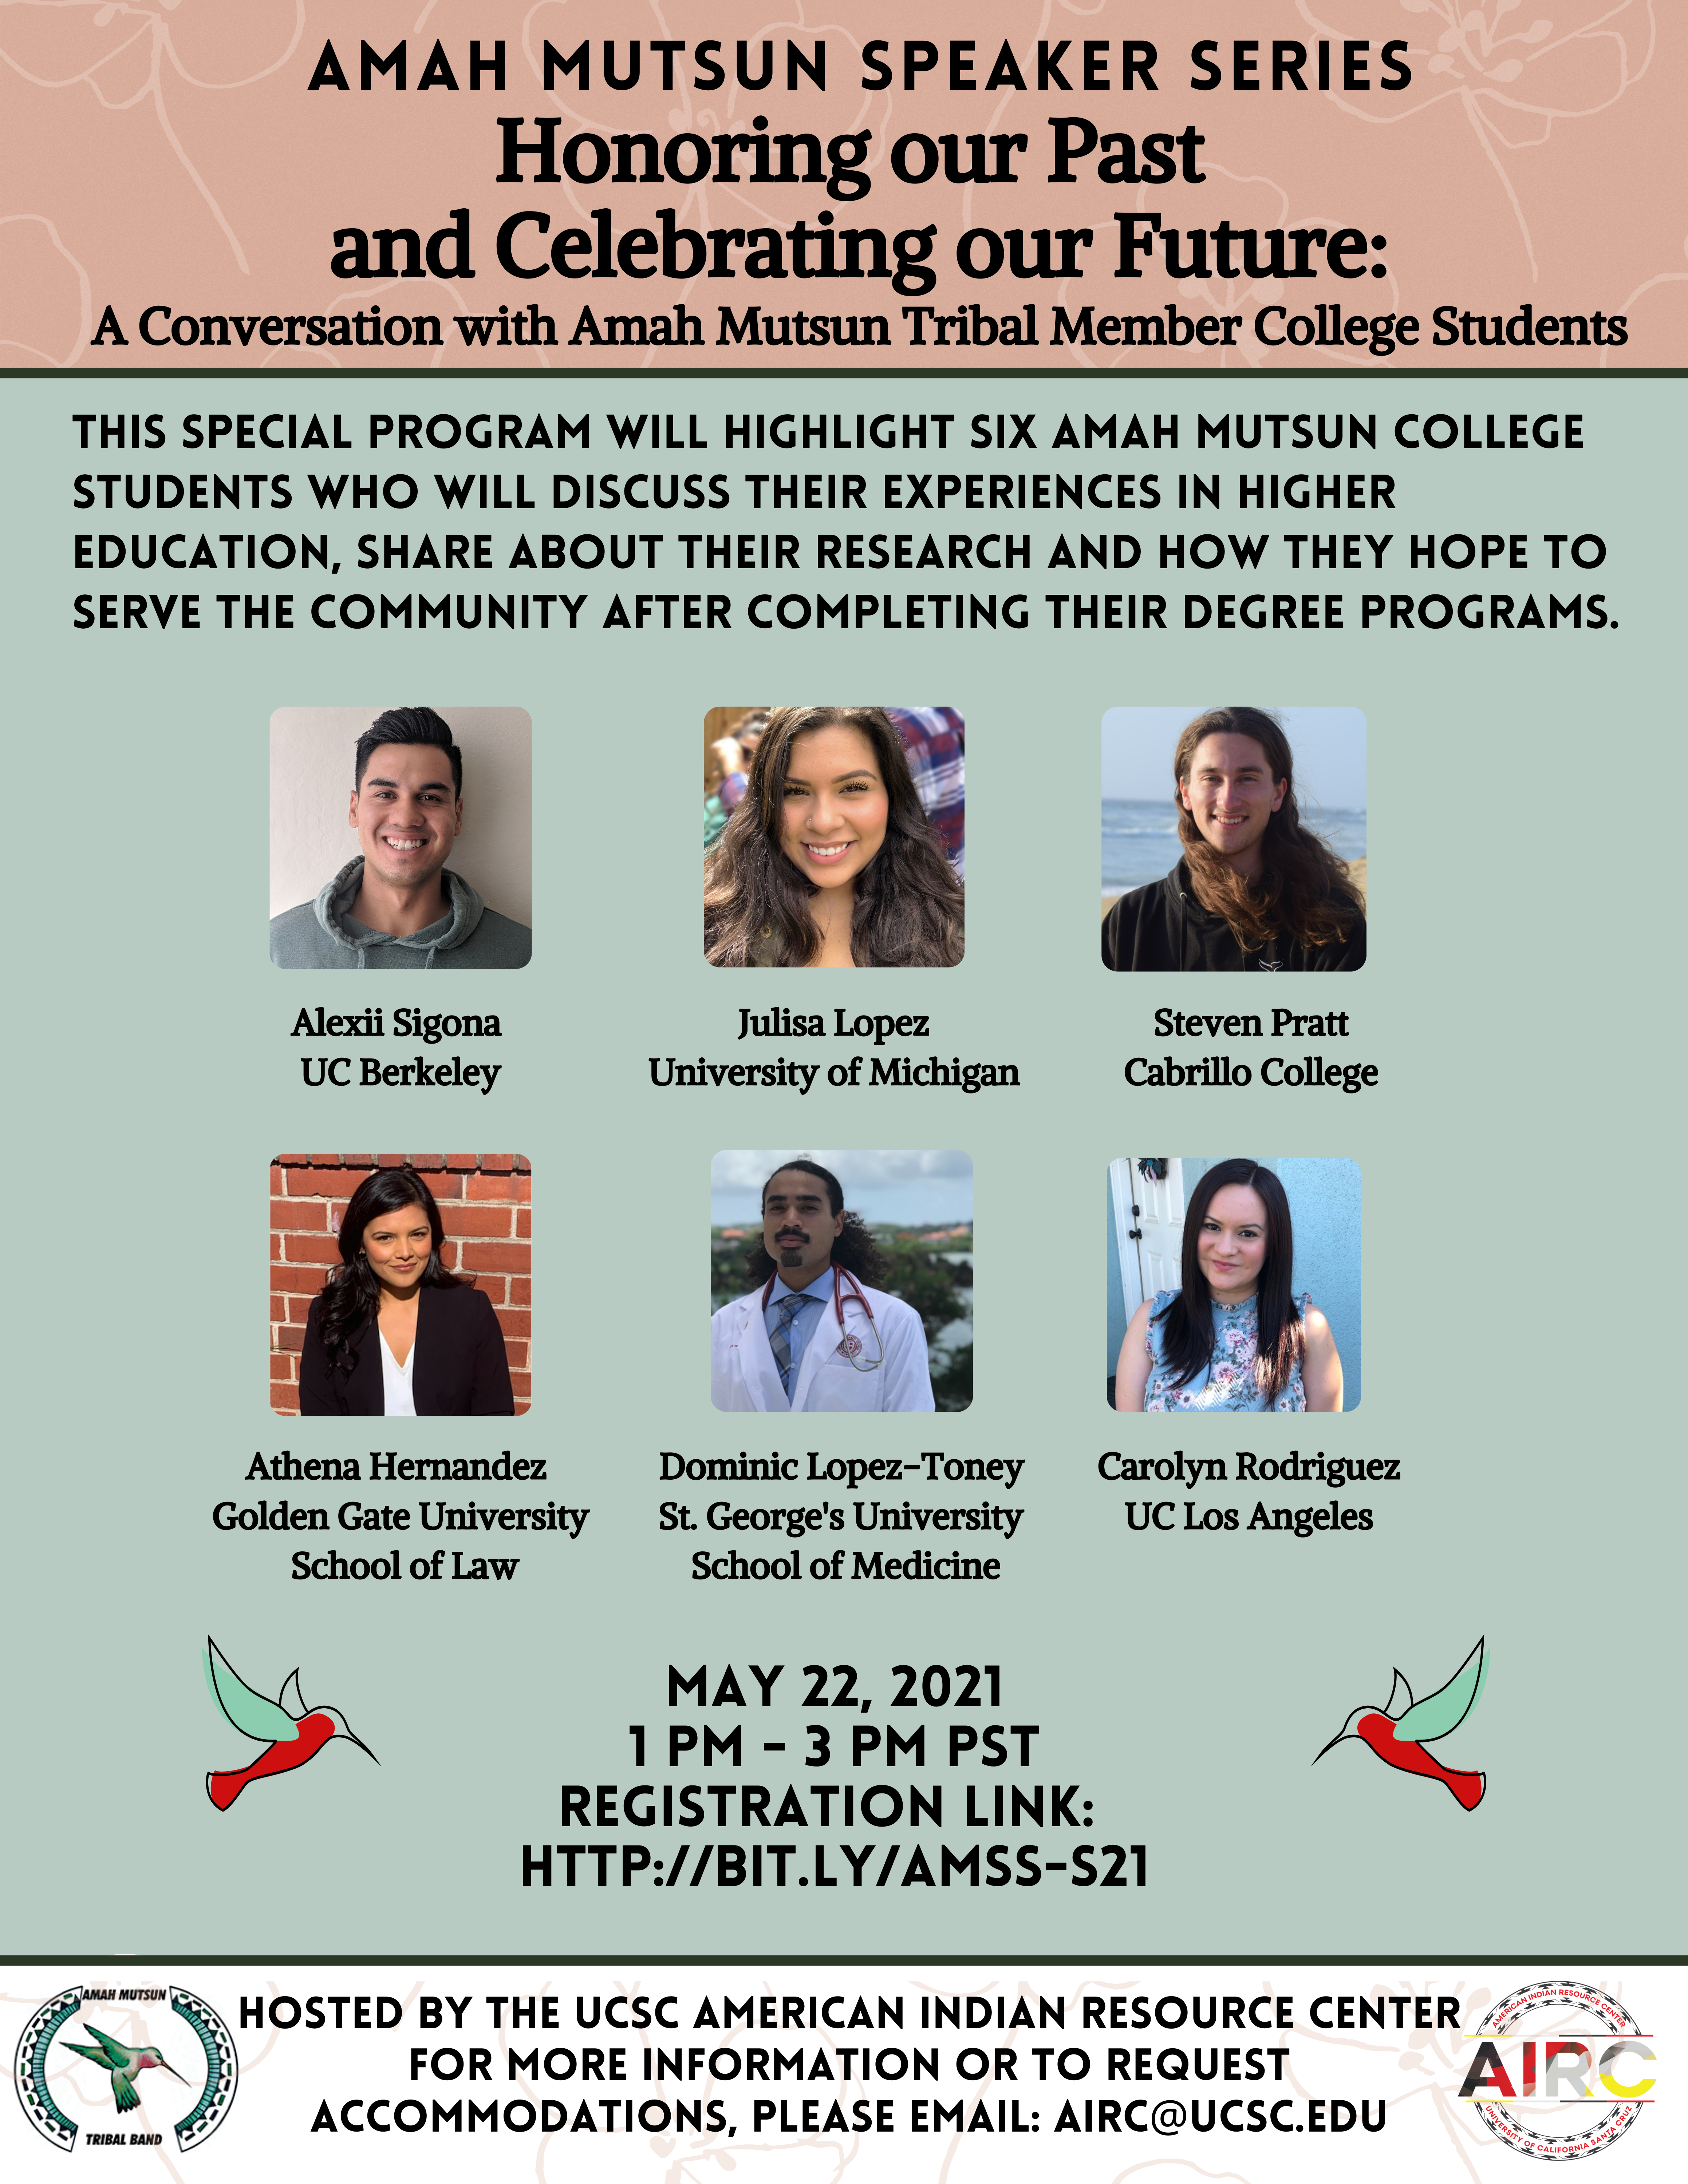 Amah Mutsun Speaker Series: Honoring Our Past and Celebrating Our Future, A conversation with Amah Mutsun tribal member college students